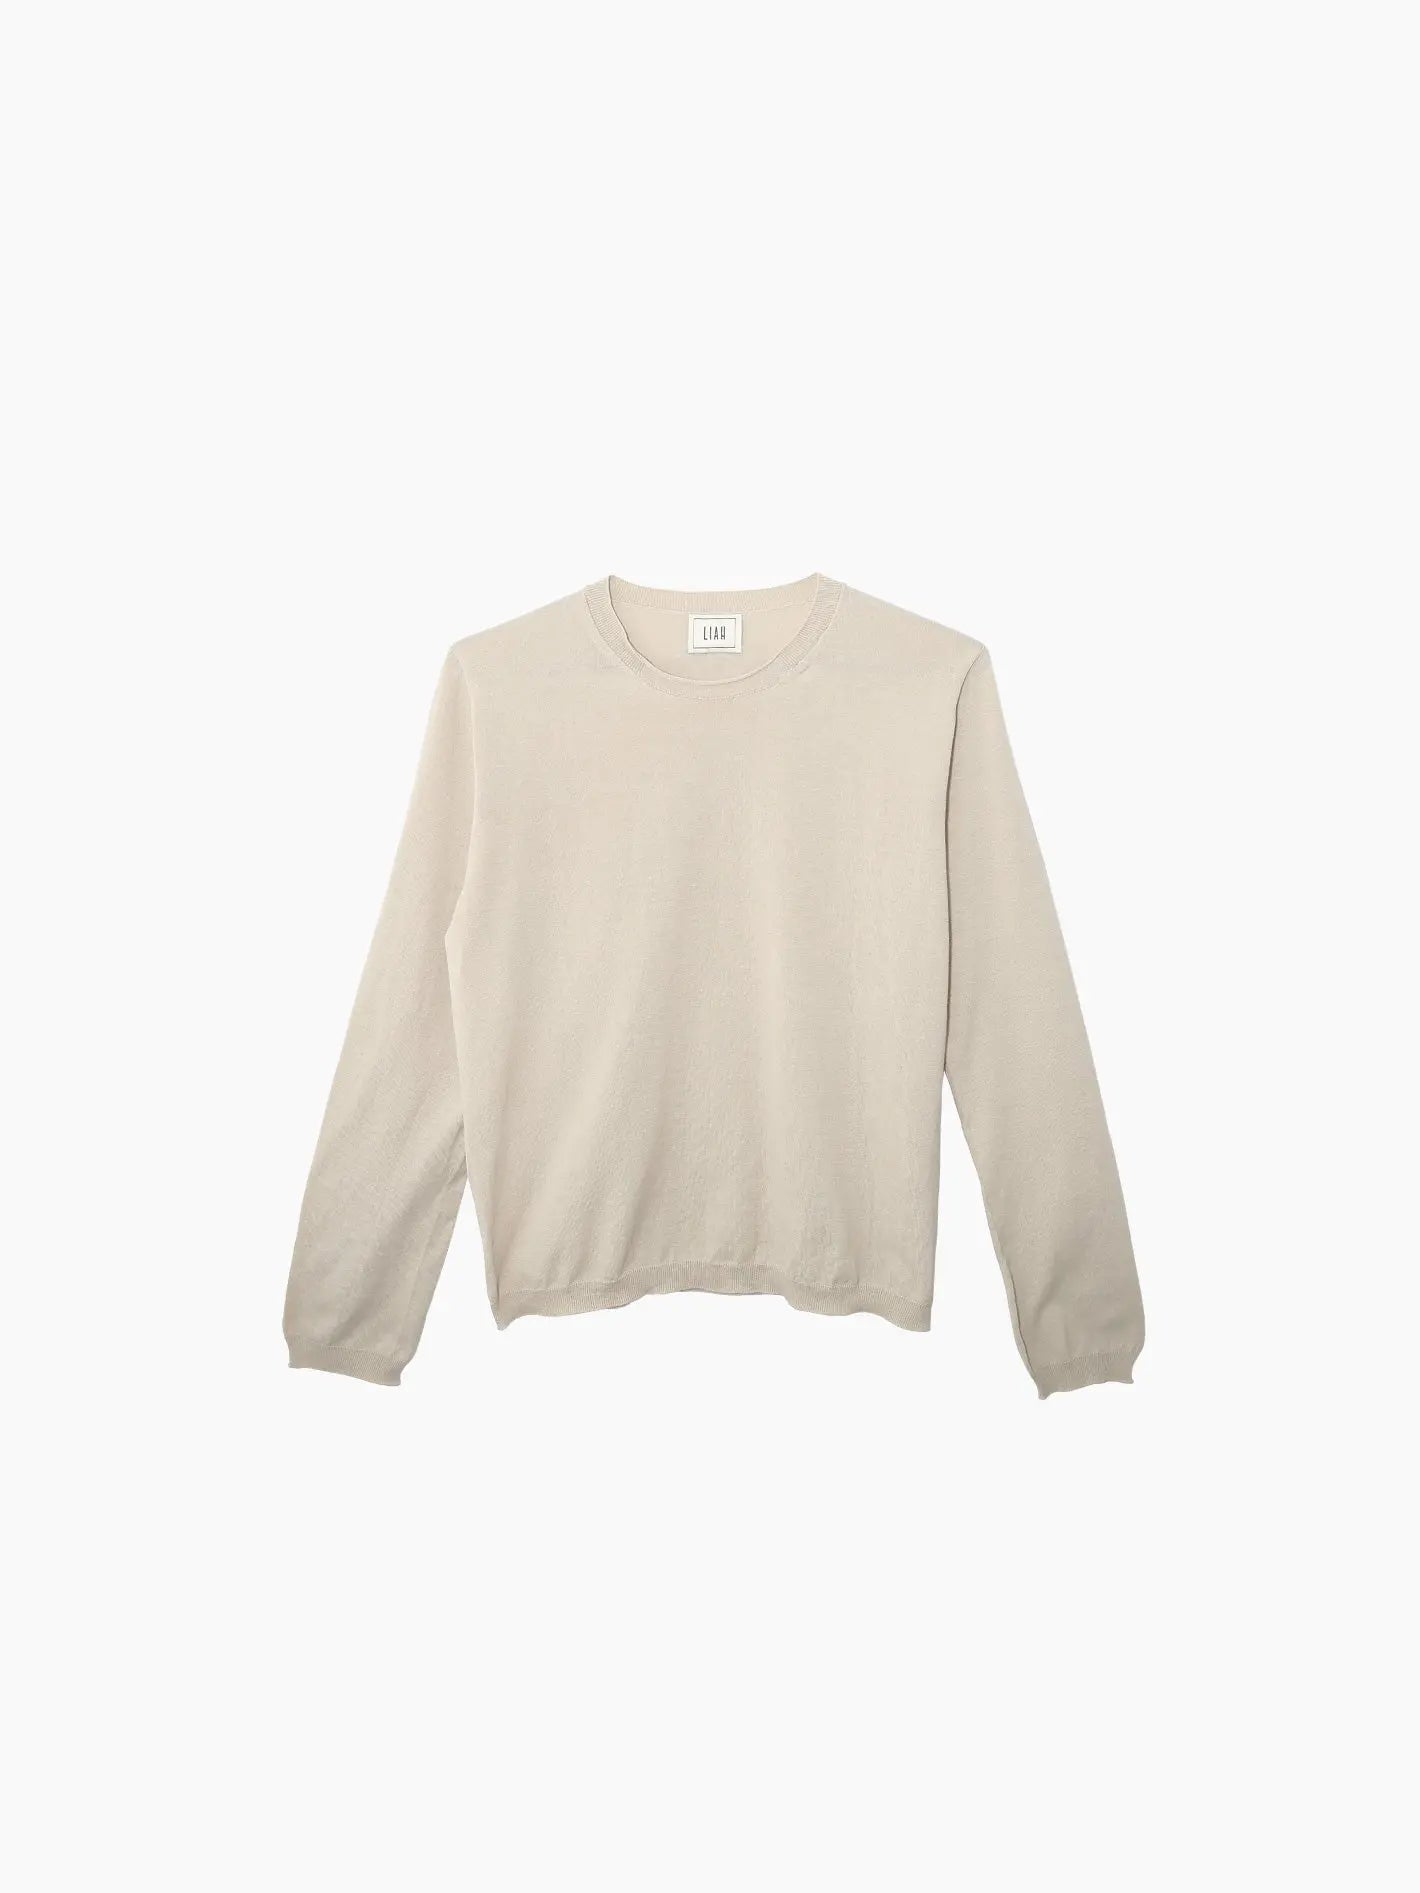 A beige, long-sleeved sweater from Bassalstore is displayed against a plain white background. The Giada T-Shirt Tea from Liah has a minimalist design, featuring a round neckline, ribbed cuffs, and a slightly loose fit. There's a white label with branding at the back of the neckline, reflecting its Barcelona origins.